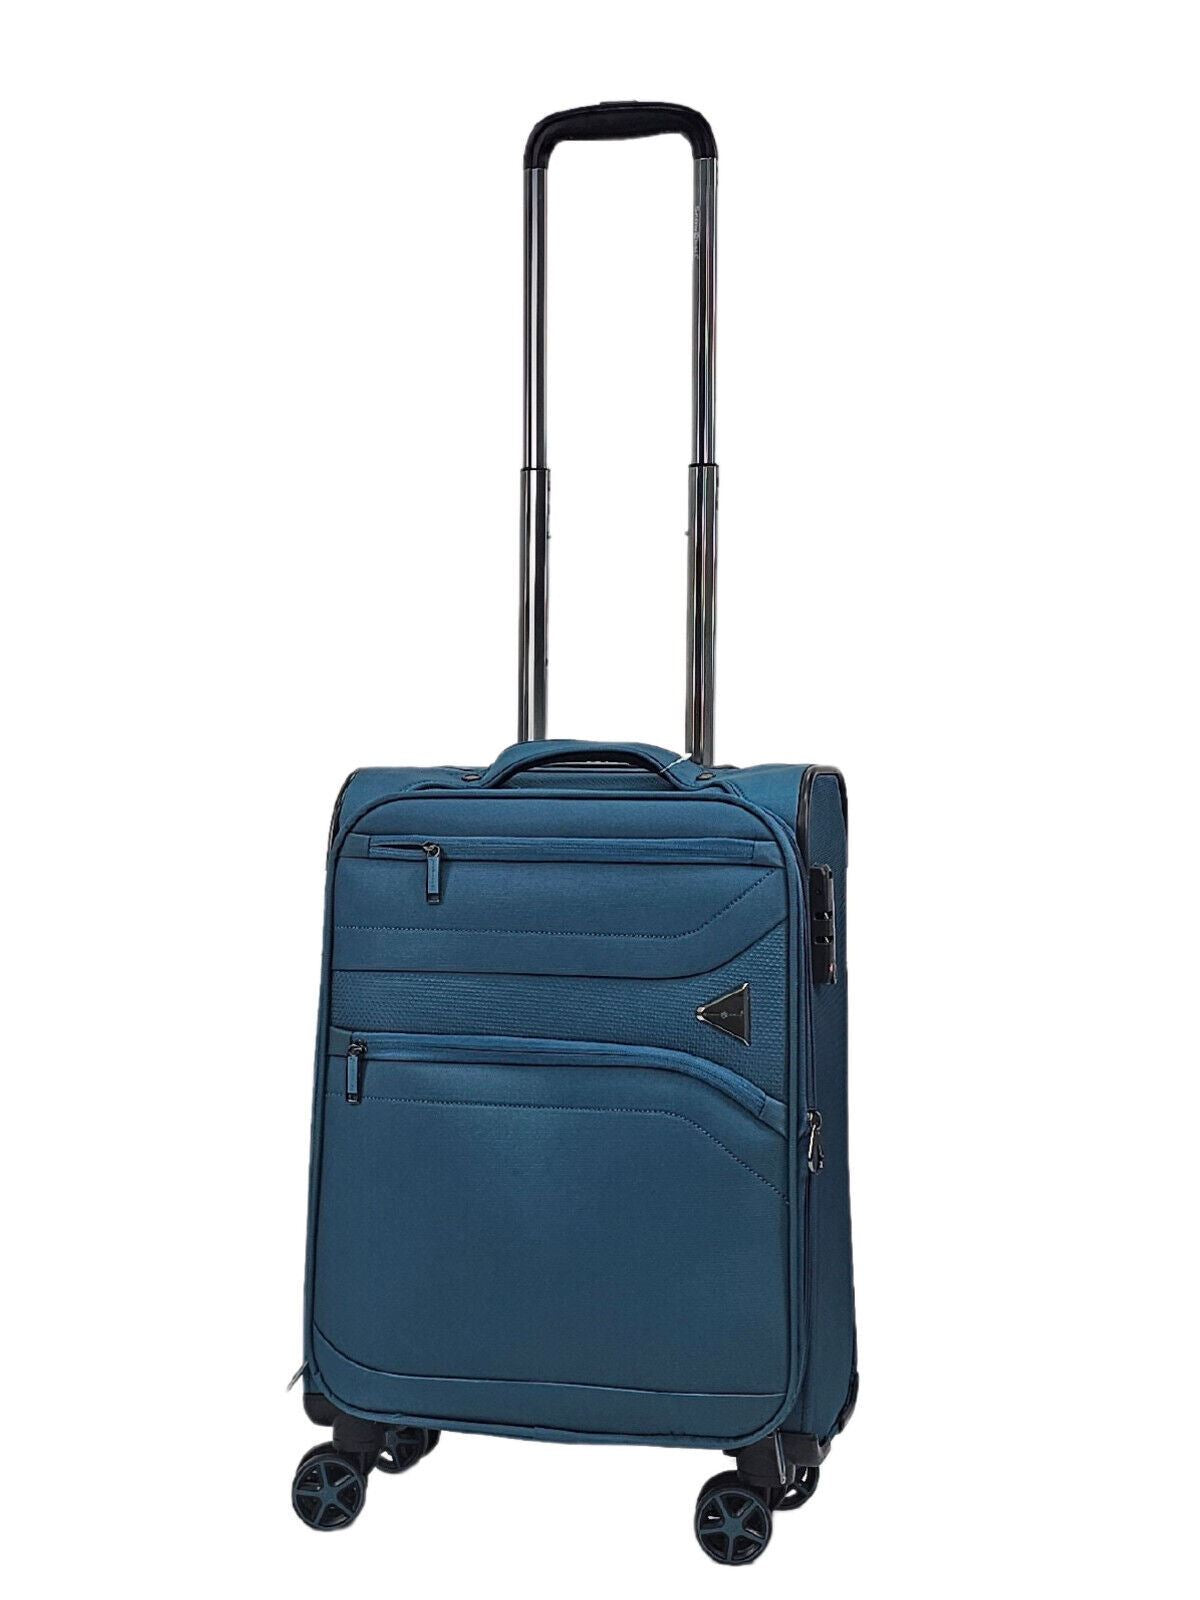 Clayton Cabin Soft Shell Suitcase in Teal